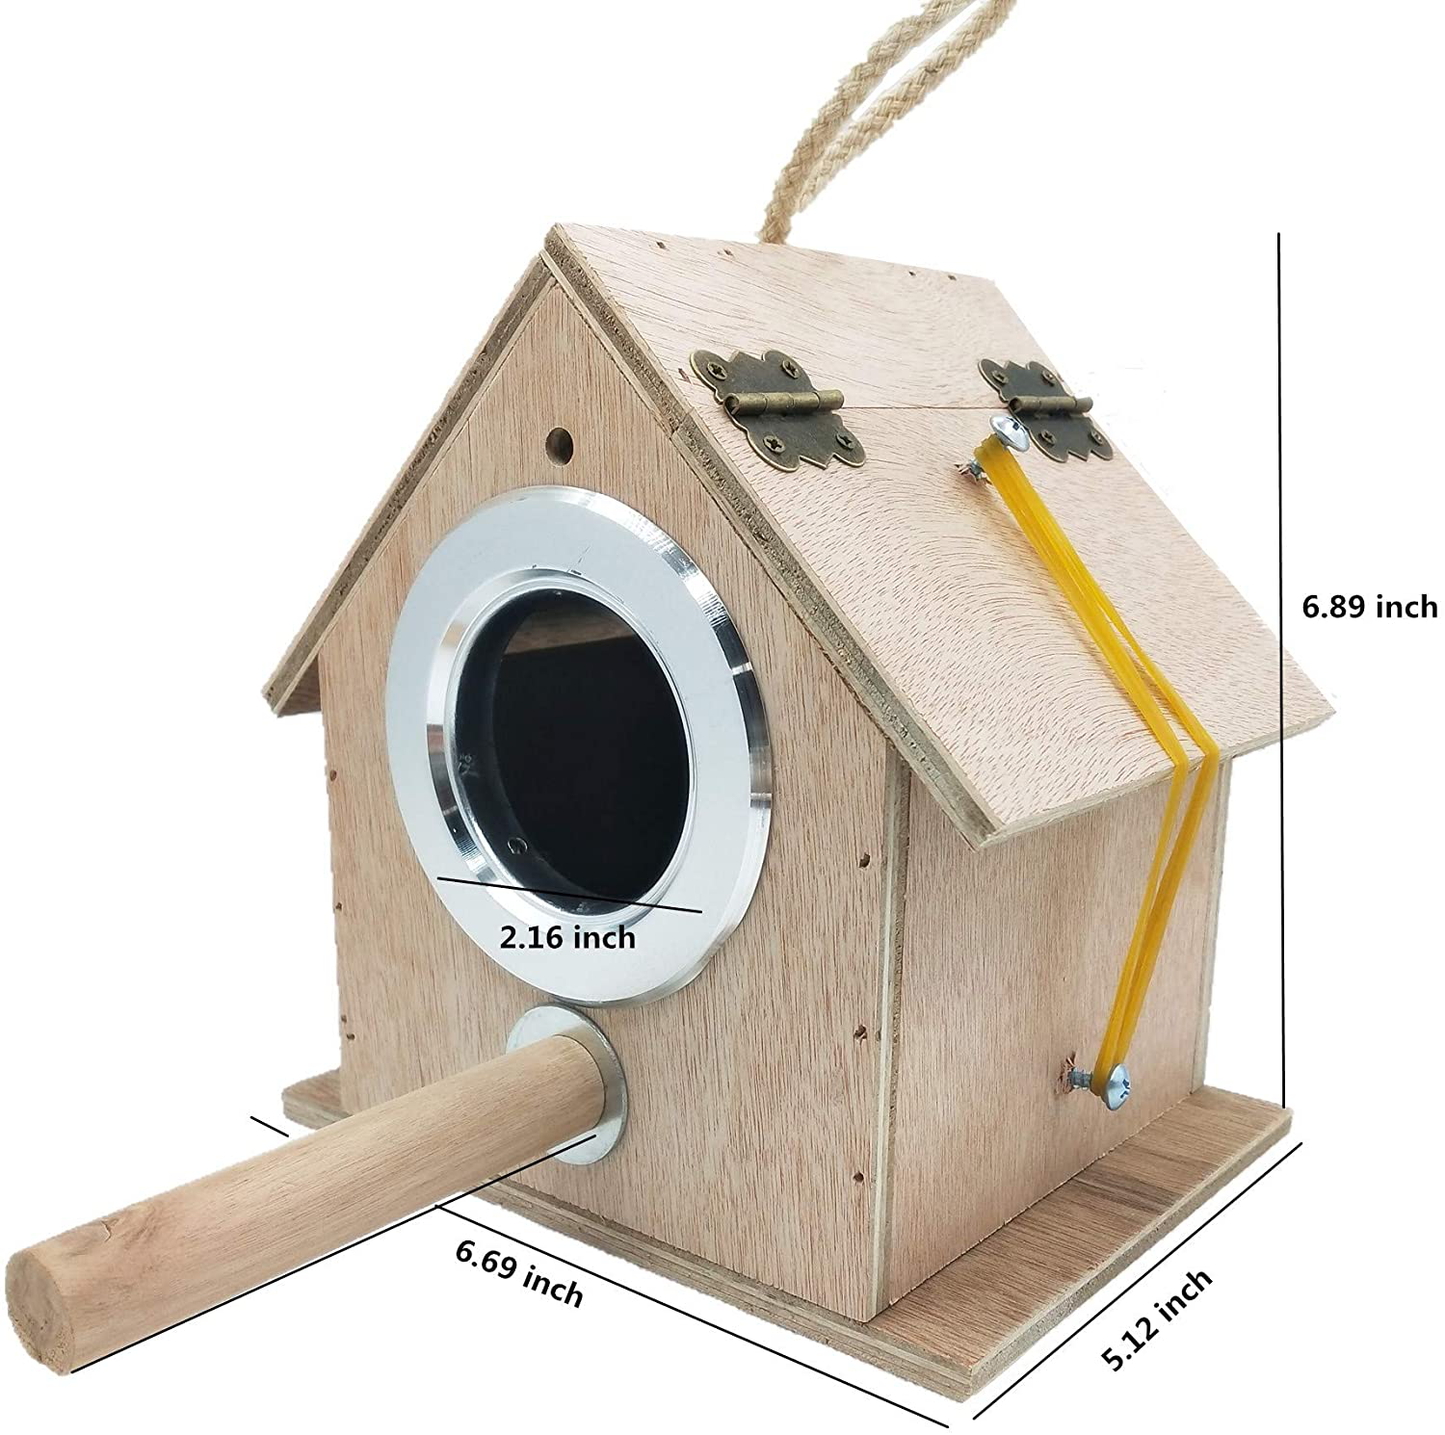 Alfyng Parakeet Nest Warm Box, Bird Breeding Box, Parrot Wood House Nesting Box, Parrotlets Budgie Mating Box, Aviary Cage Box for Lovebirds, Cockatiel, with Birds Stand Perch Animals & Pet Supplies > Pet Supplies > Bird Supplies > Bird Cages & Stands alfyng   